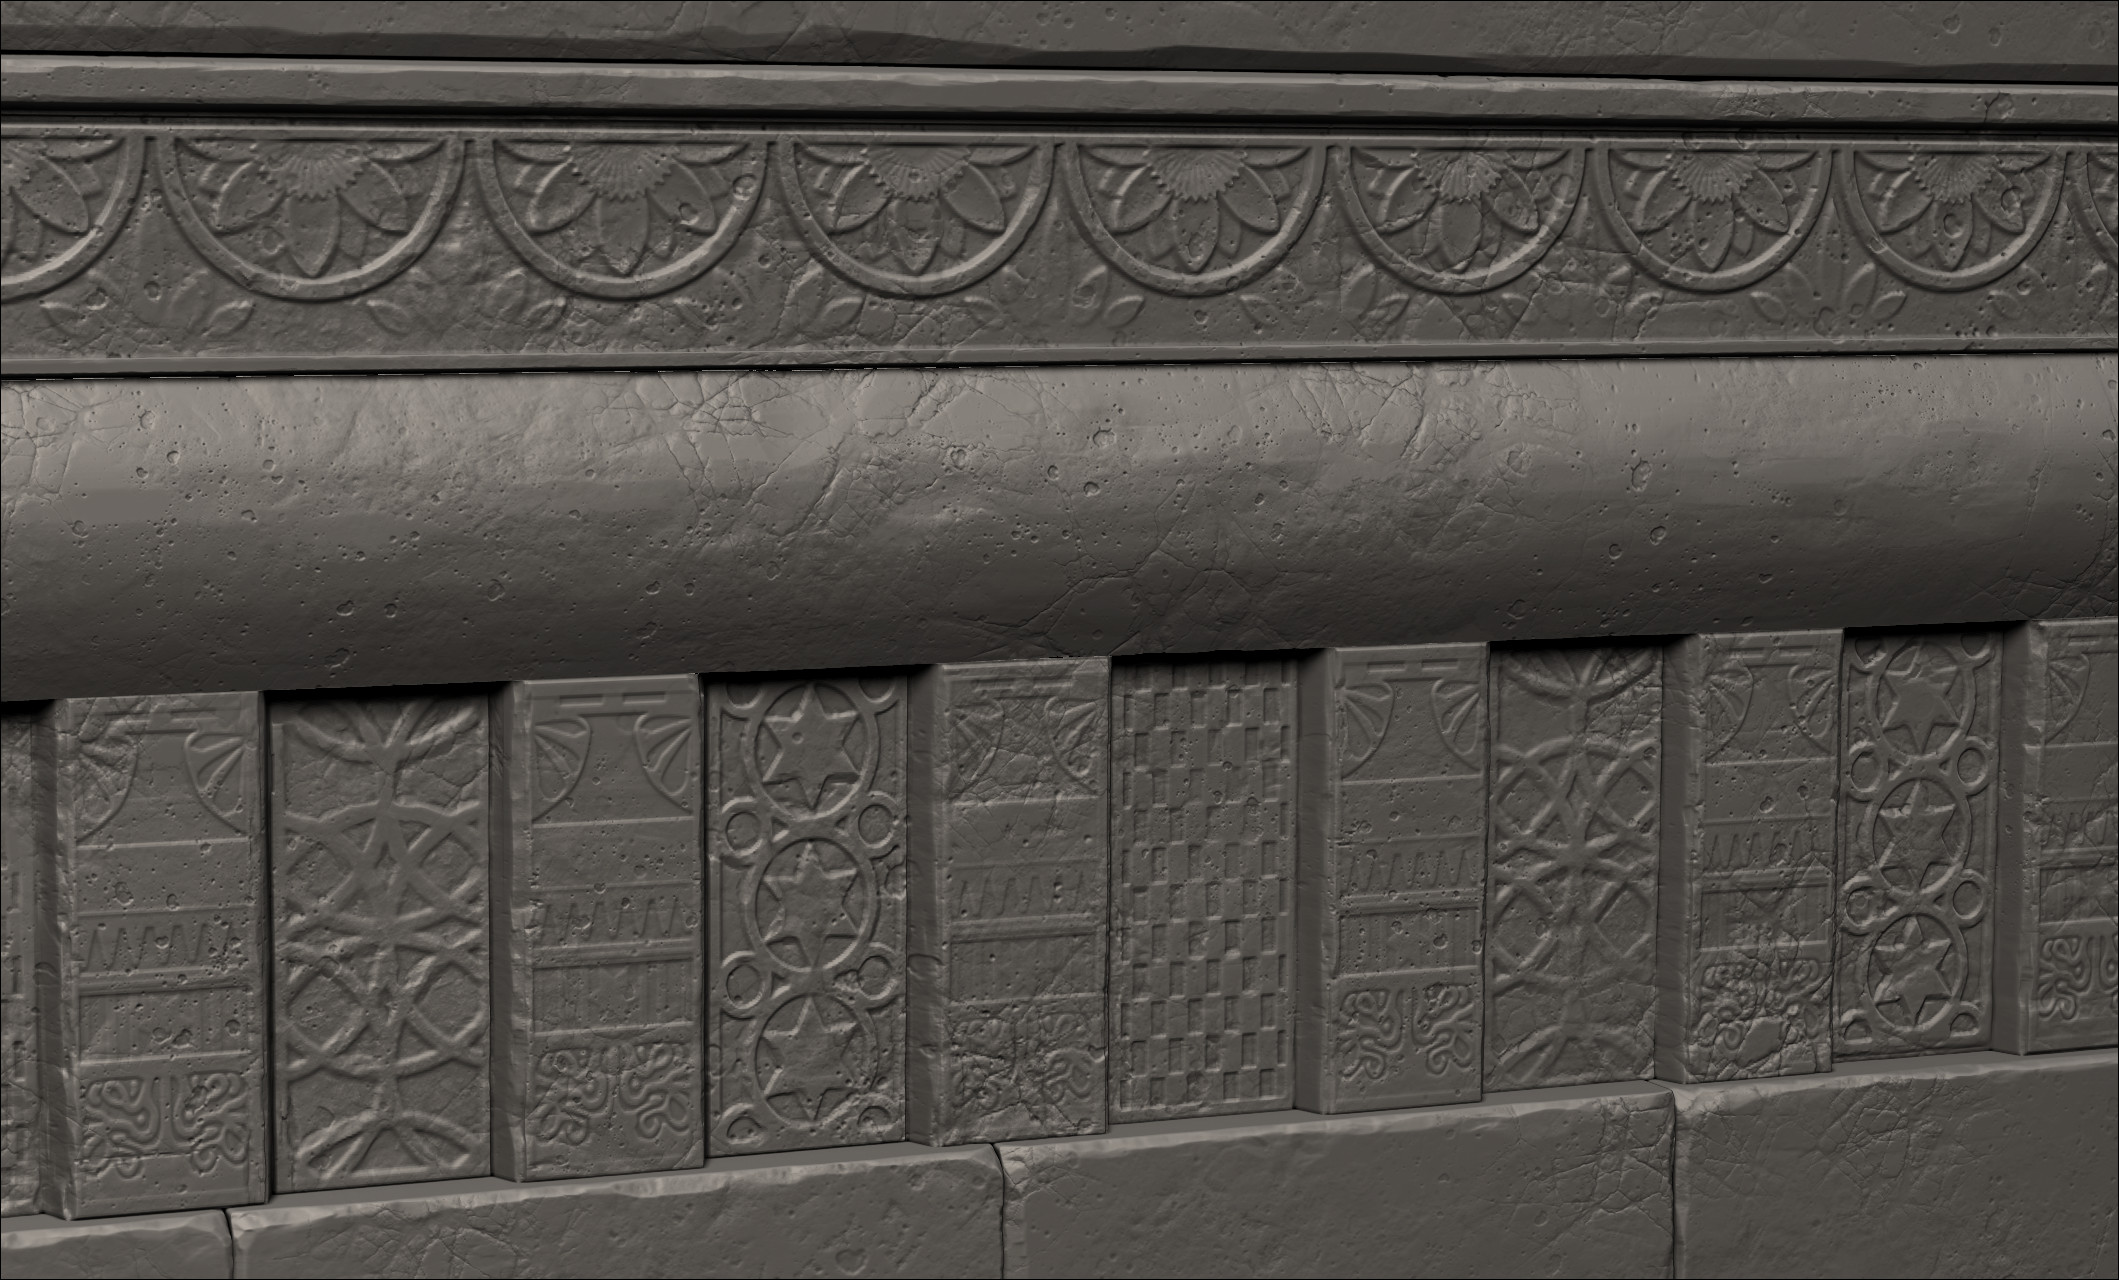 details, these were loosely based on / inspired by patterns from reference pictures of the Adalaj Stepwell in India.